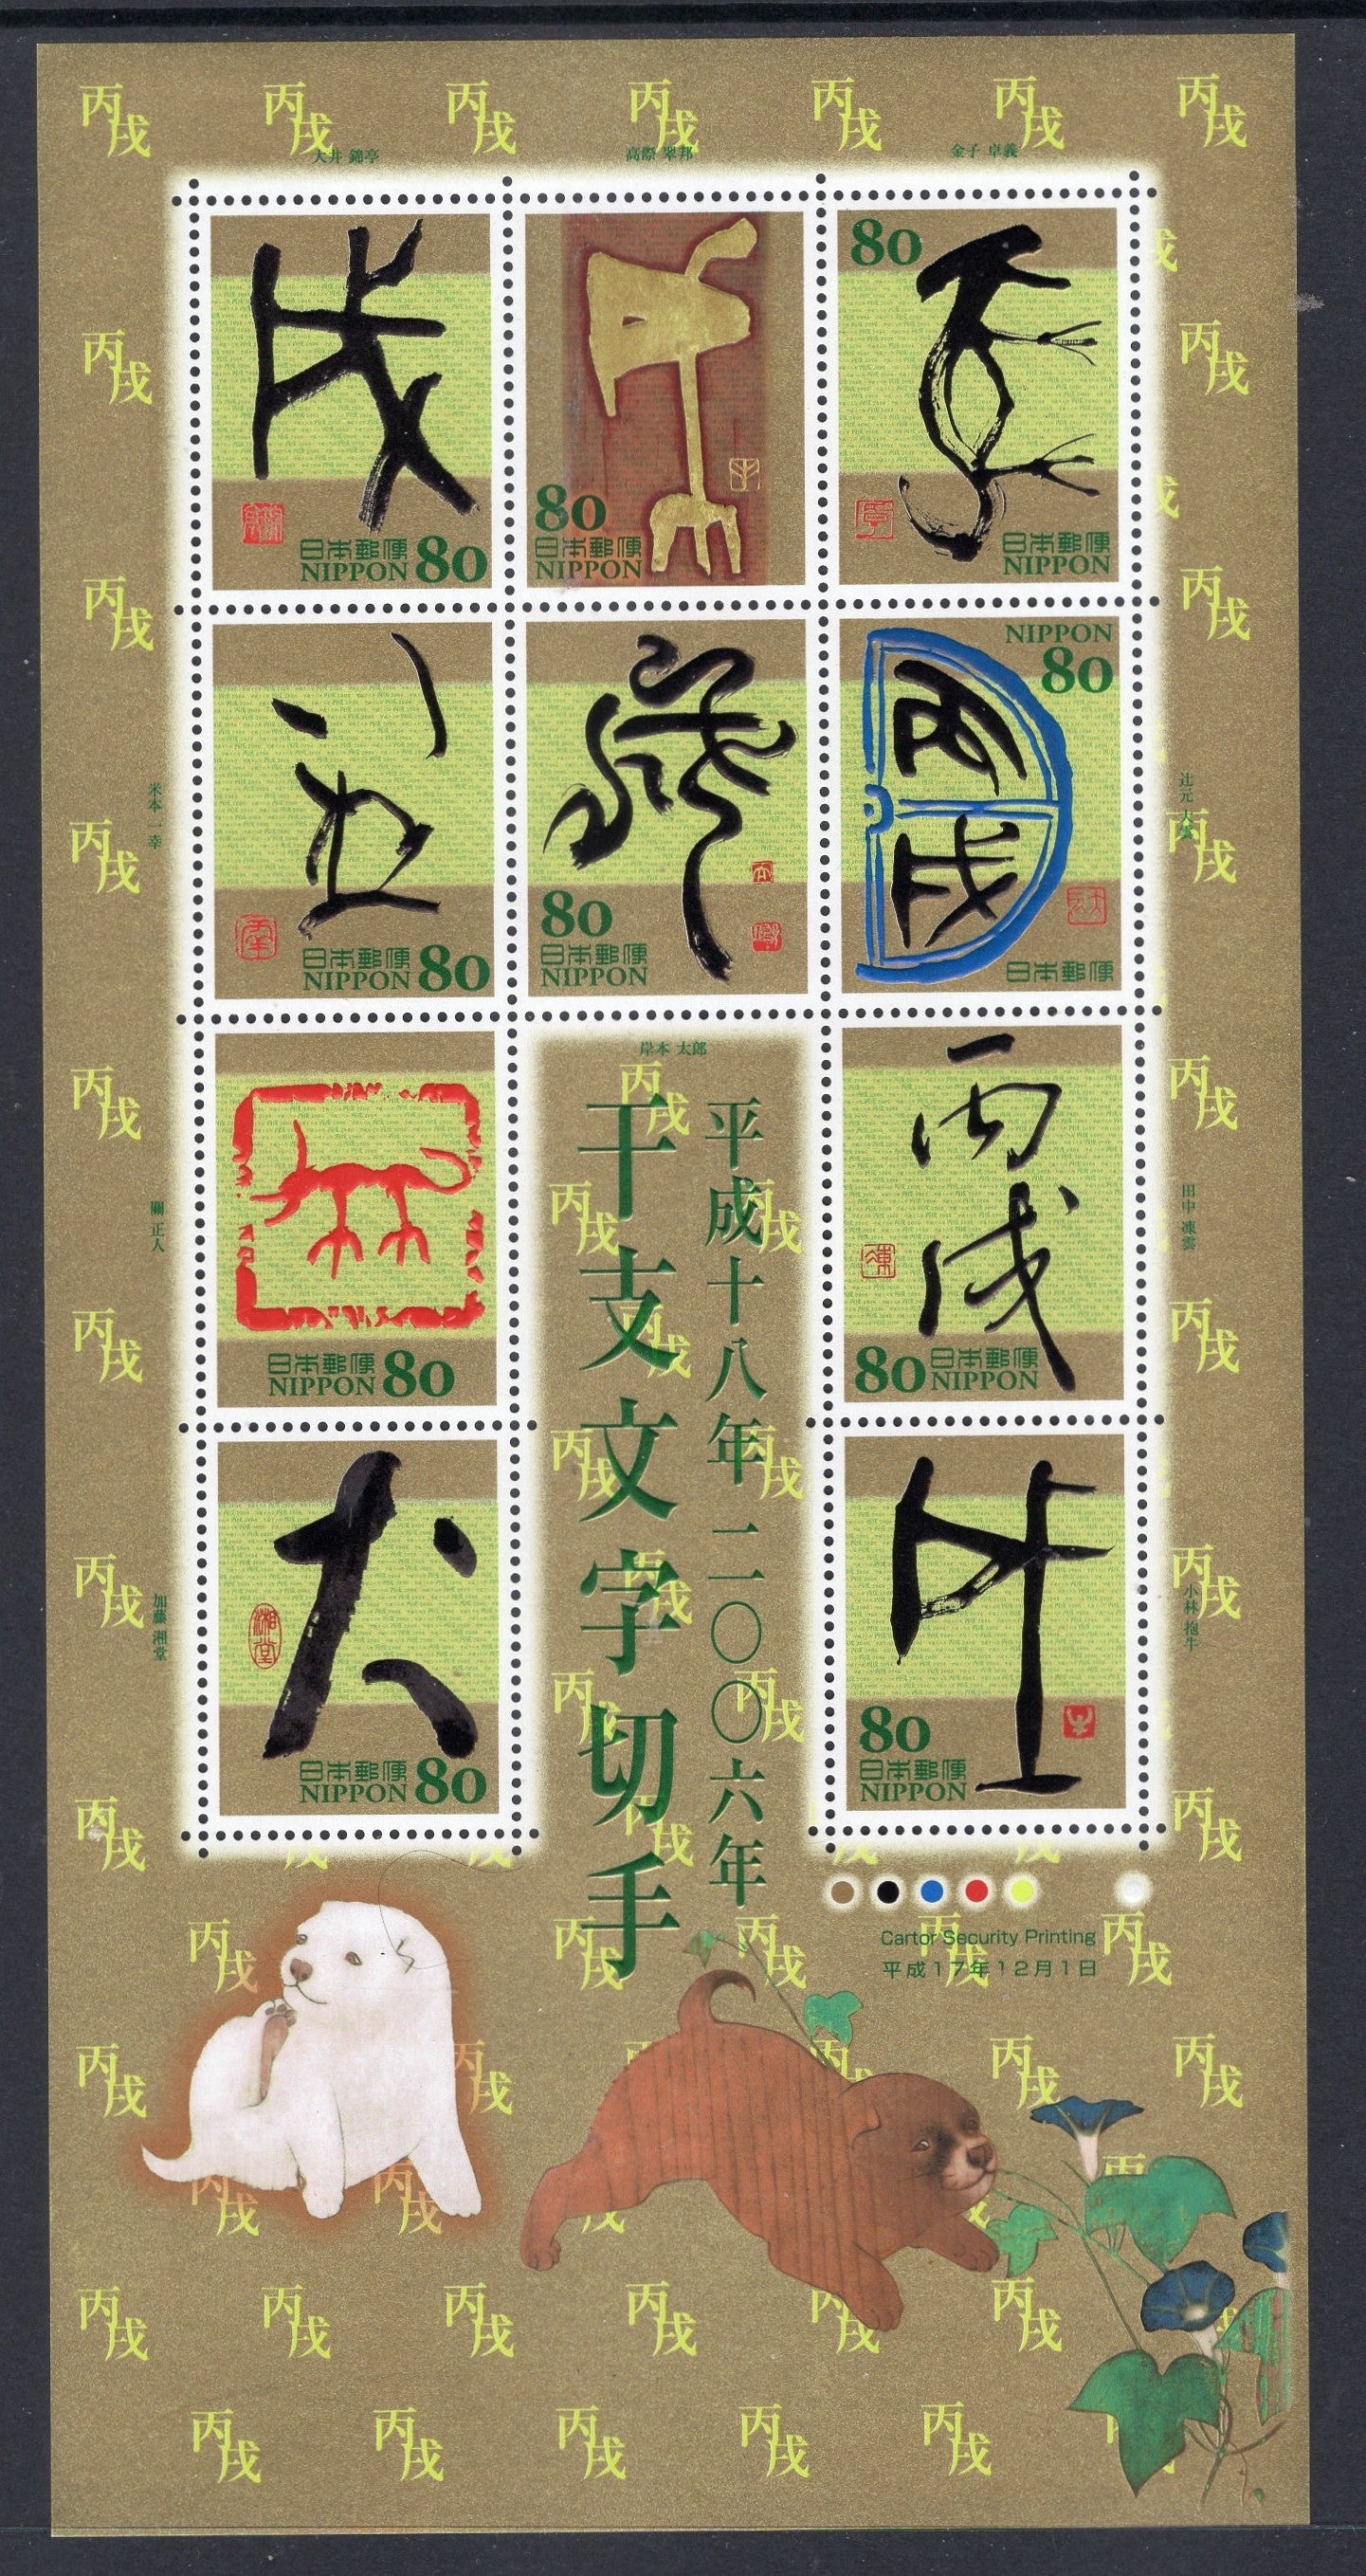 JAPAN EDO CALLIGRAPHY SHEET of 10 Stamps for the LUNAR YEAR of the DOG 2006 with Two Dogs in Illustration in the bottom margin.  Issued on December 1 2005